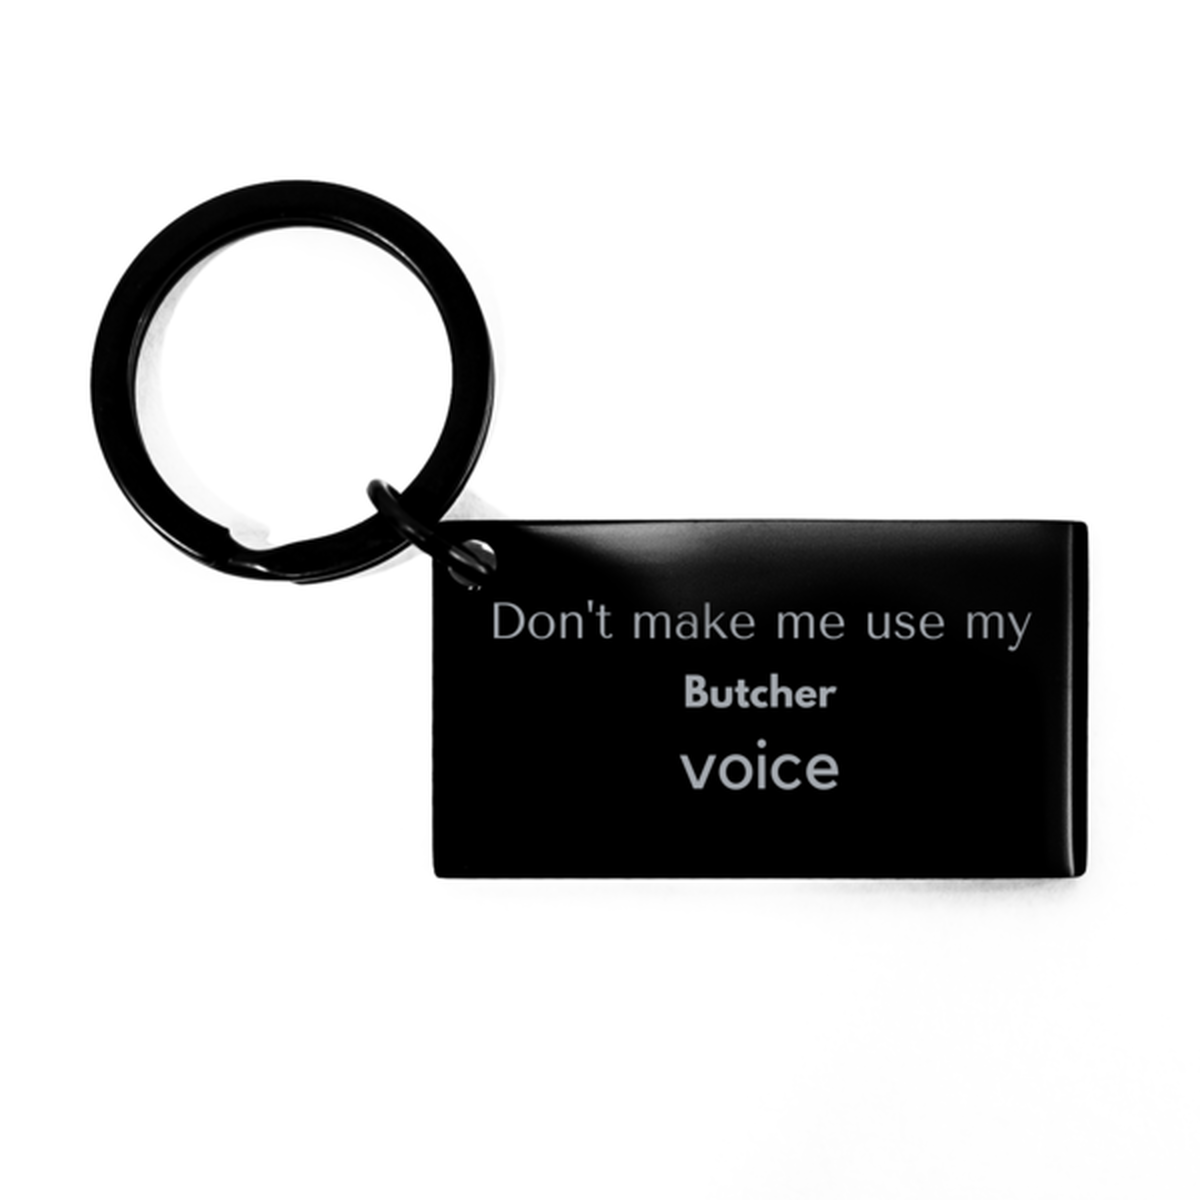 Don't make me use my Butcher voice, Sarcasm Butcher Gifts, Christmas Butcher Keychain Birthday Unique Gifts For Butcher Coworkers, Men, Women, Colleague, Friends